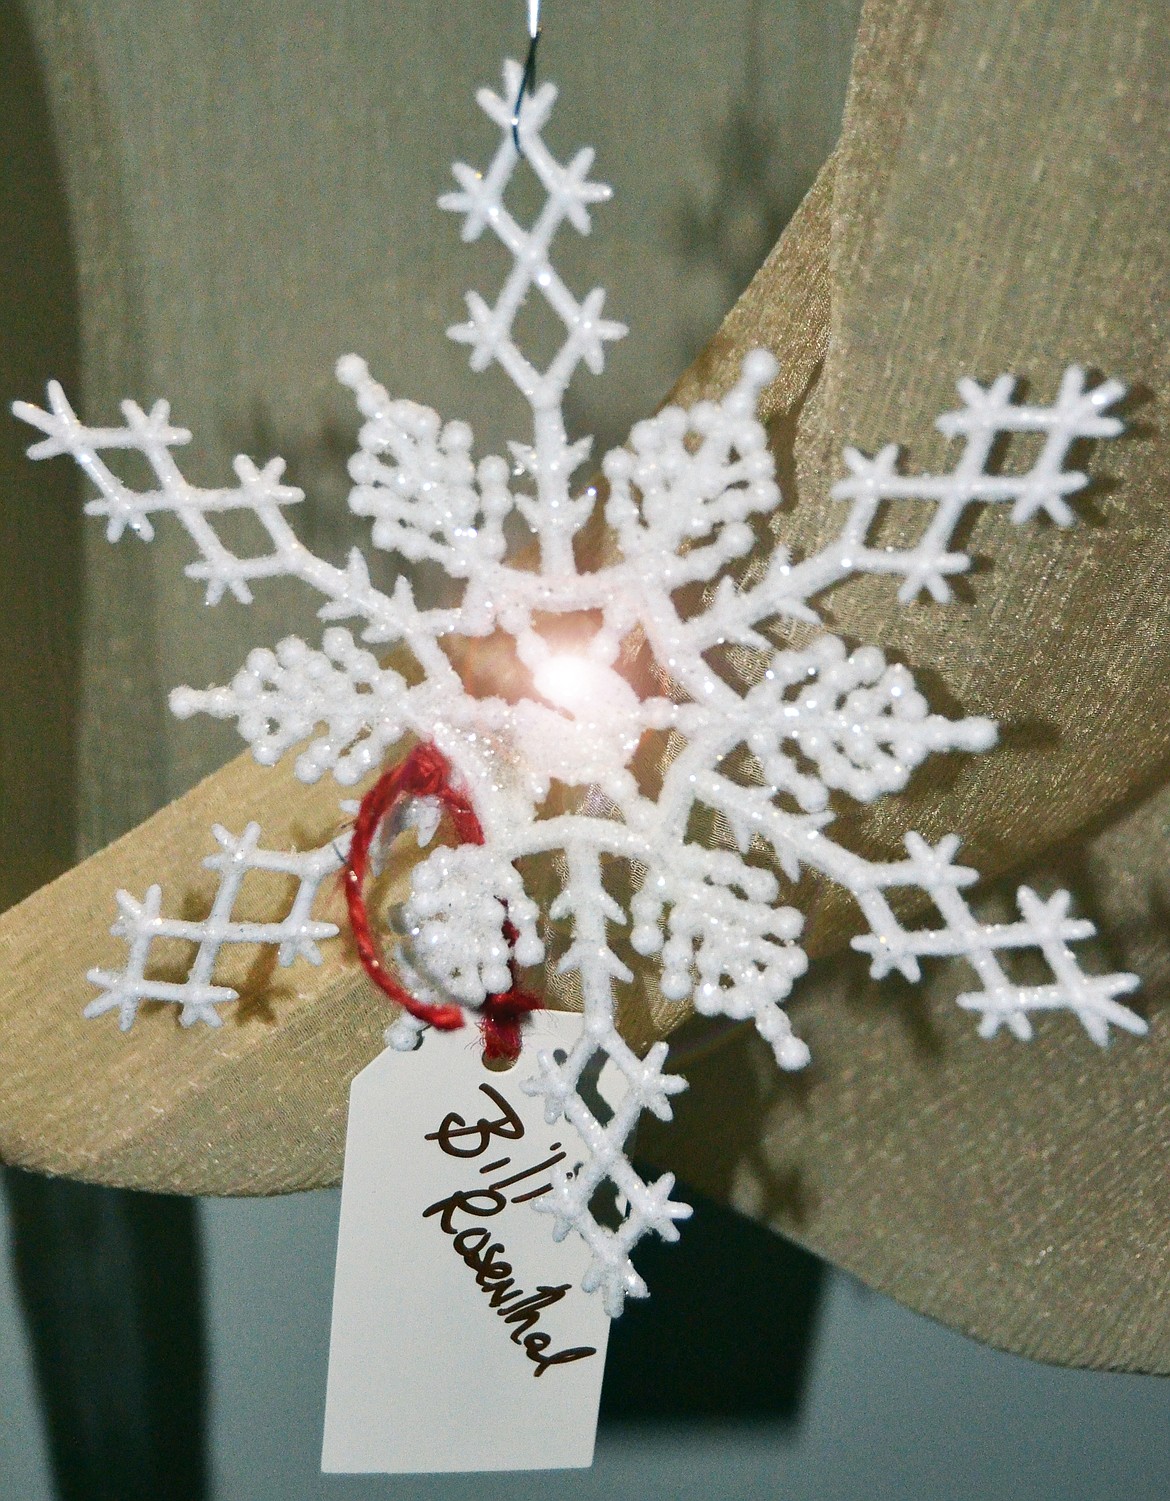 A snowflake ornament placed on the remembrance tree for a loved one. (Erin Jusseaume/ Clark Fork Valley Press)